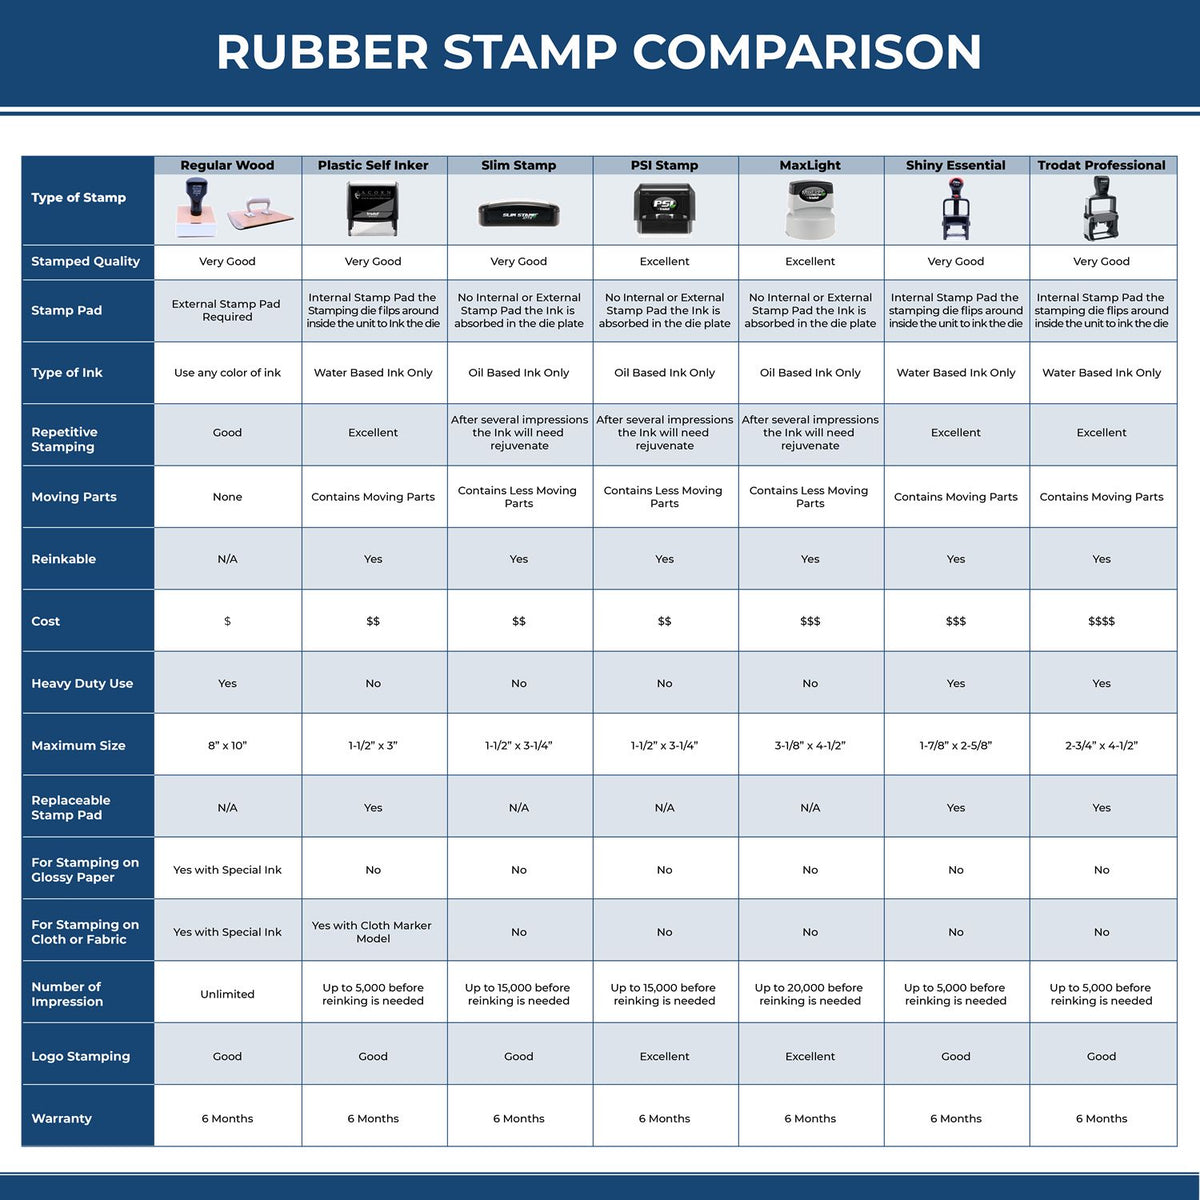 Large Please Pay Now No Statements will be Sent Rubber Stamp 4909R Rubber Stamp Comparison